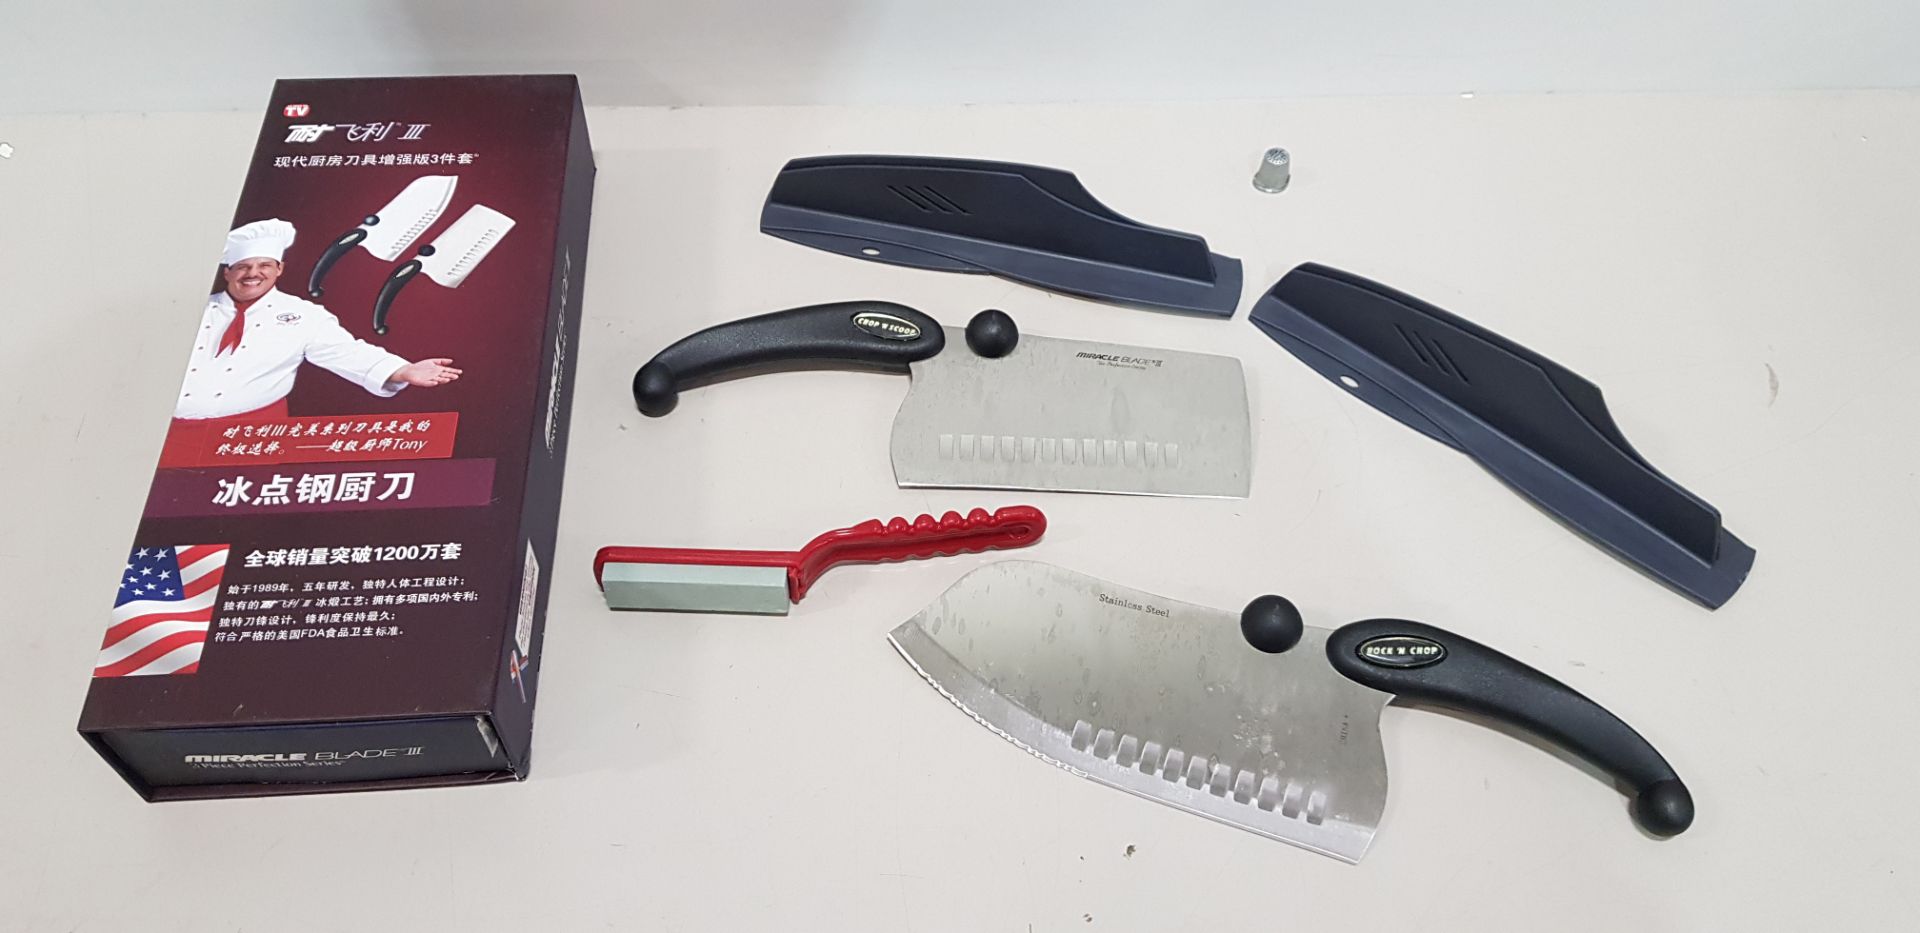 24 X BRAND NEW MIRACLE BLADE 3 PIECE PERFECTION SERIES KNIFE SET TO INCLUDE 2 X LARGE KNIFES AND